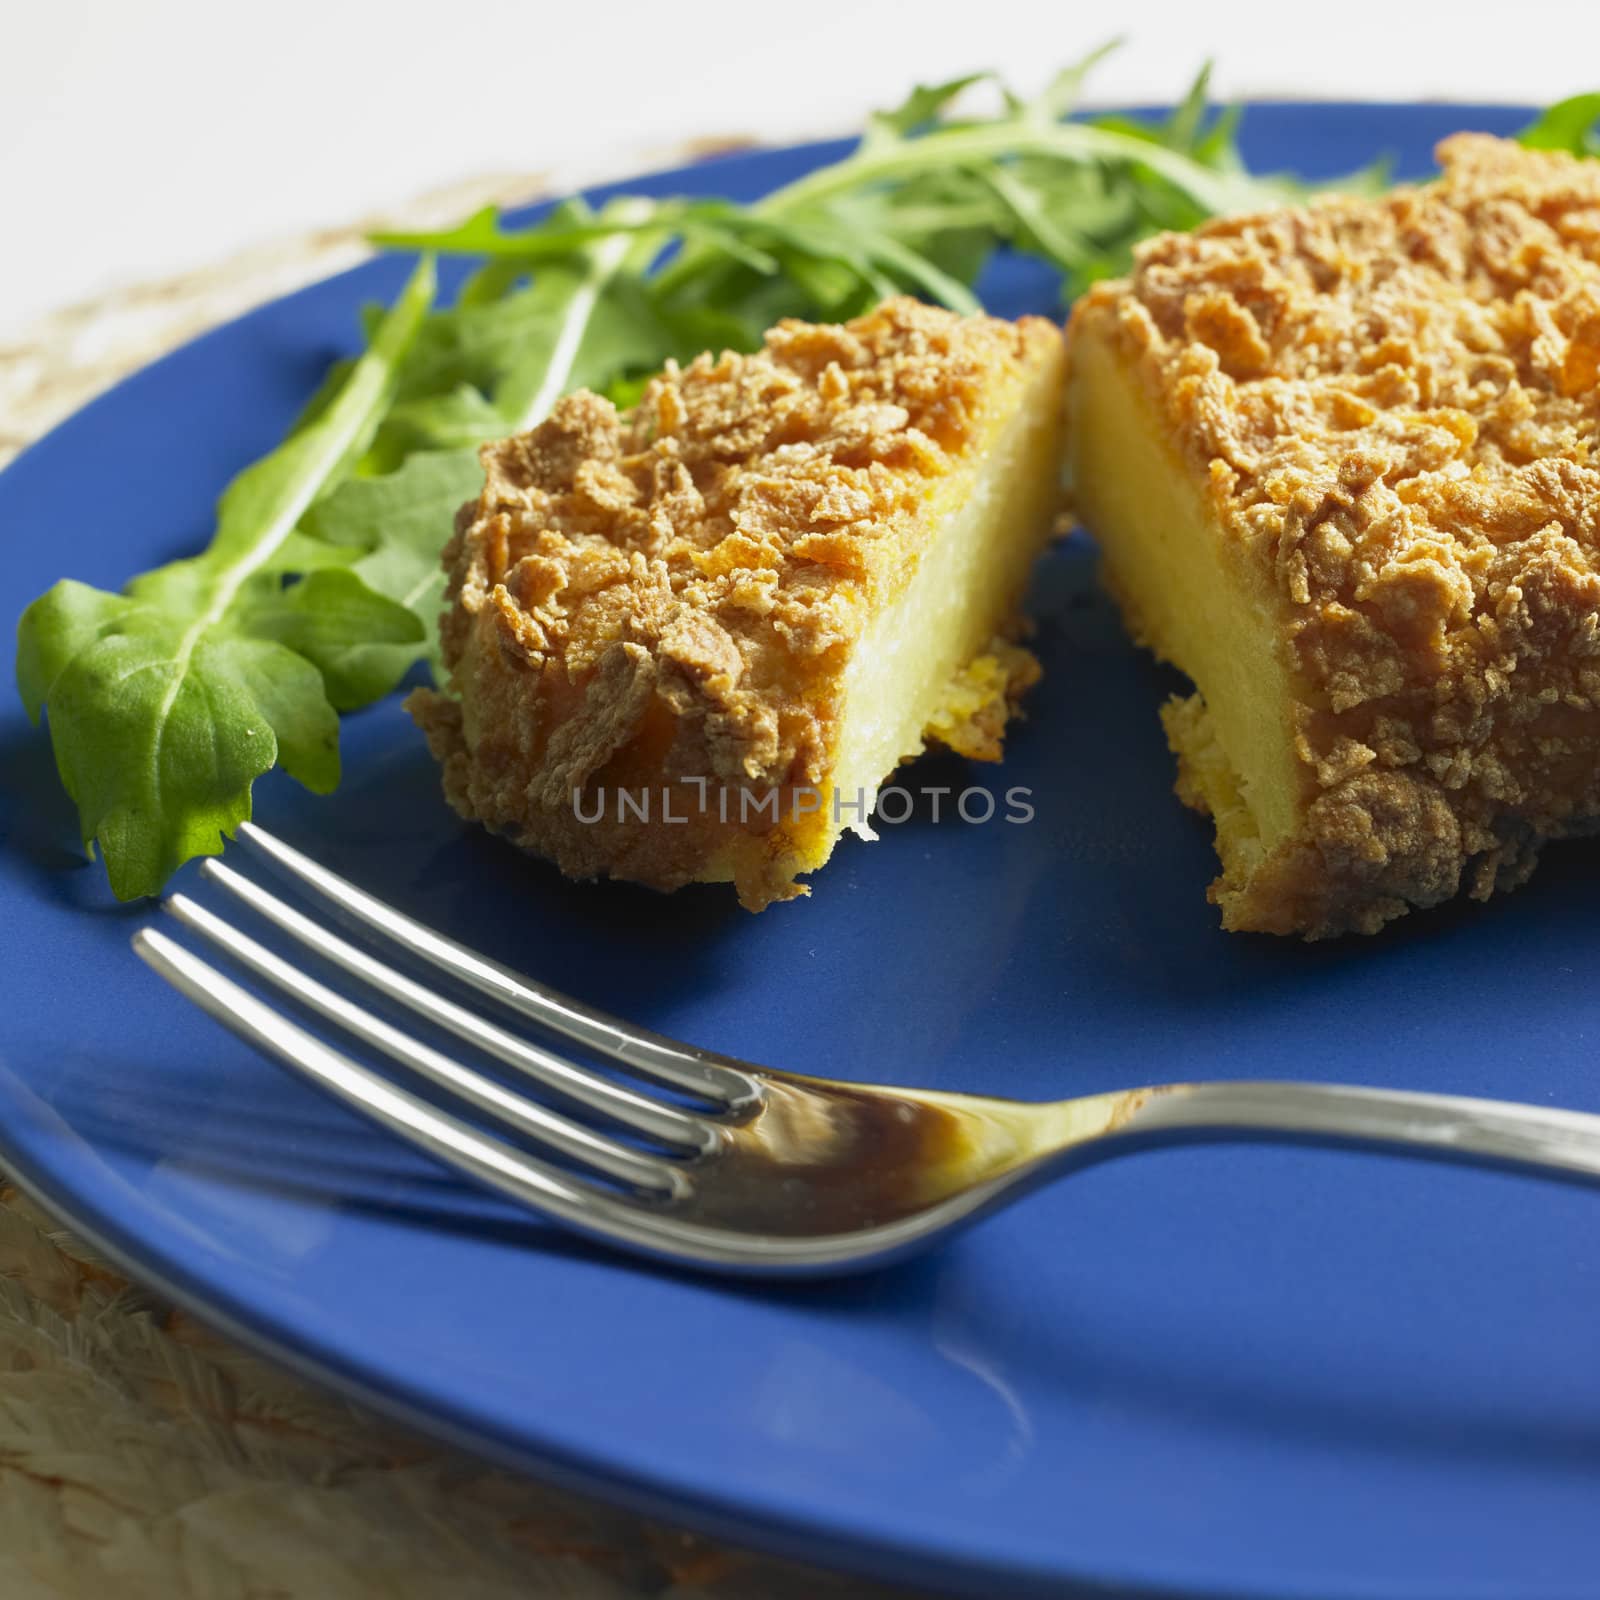 potato fillet in cornflakes by phbcz